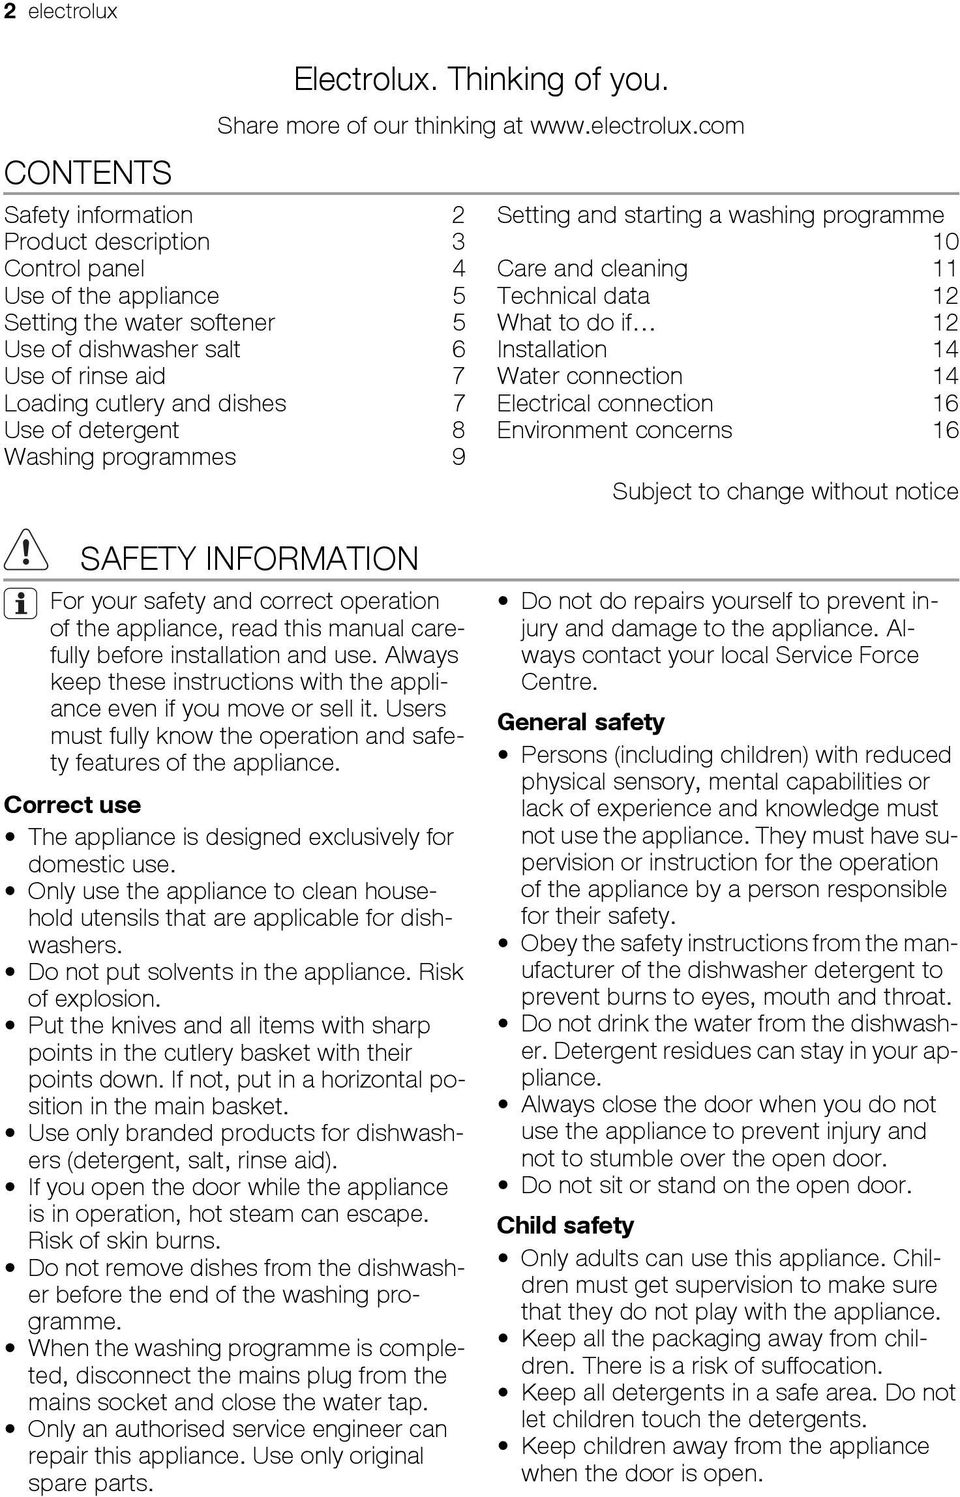 com Safety information 2 Product description 3 Control panel 4 Use of the appliance 5 Setting the water softener 5 Use of dishwasher salt 6 Use of rinse aid 7 Loading cutlery and dishes 7 Use of